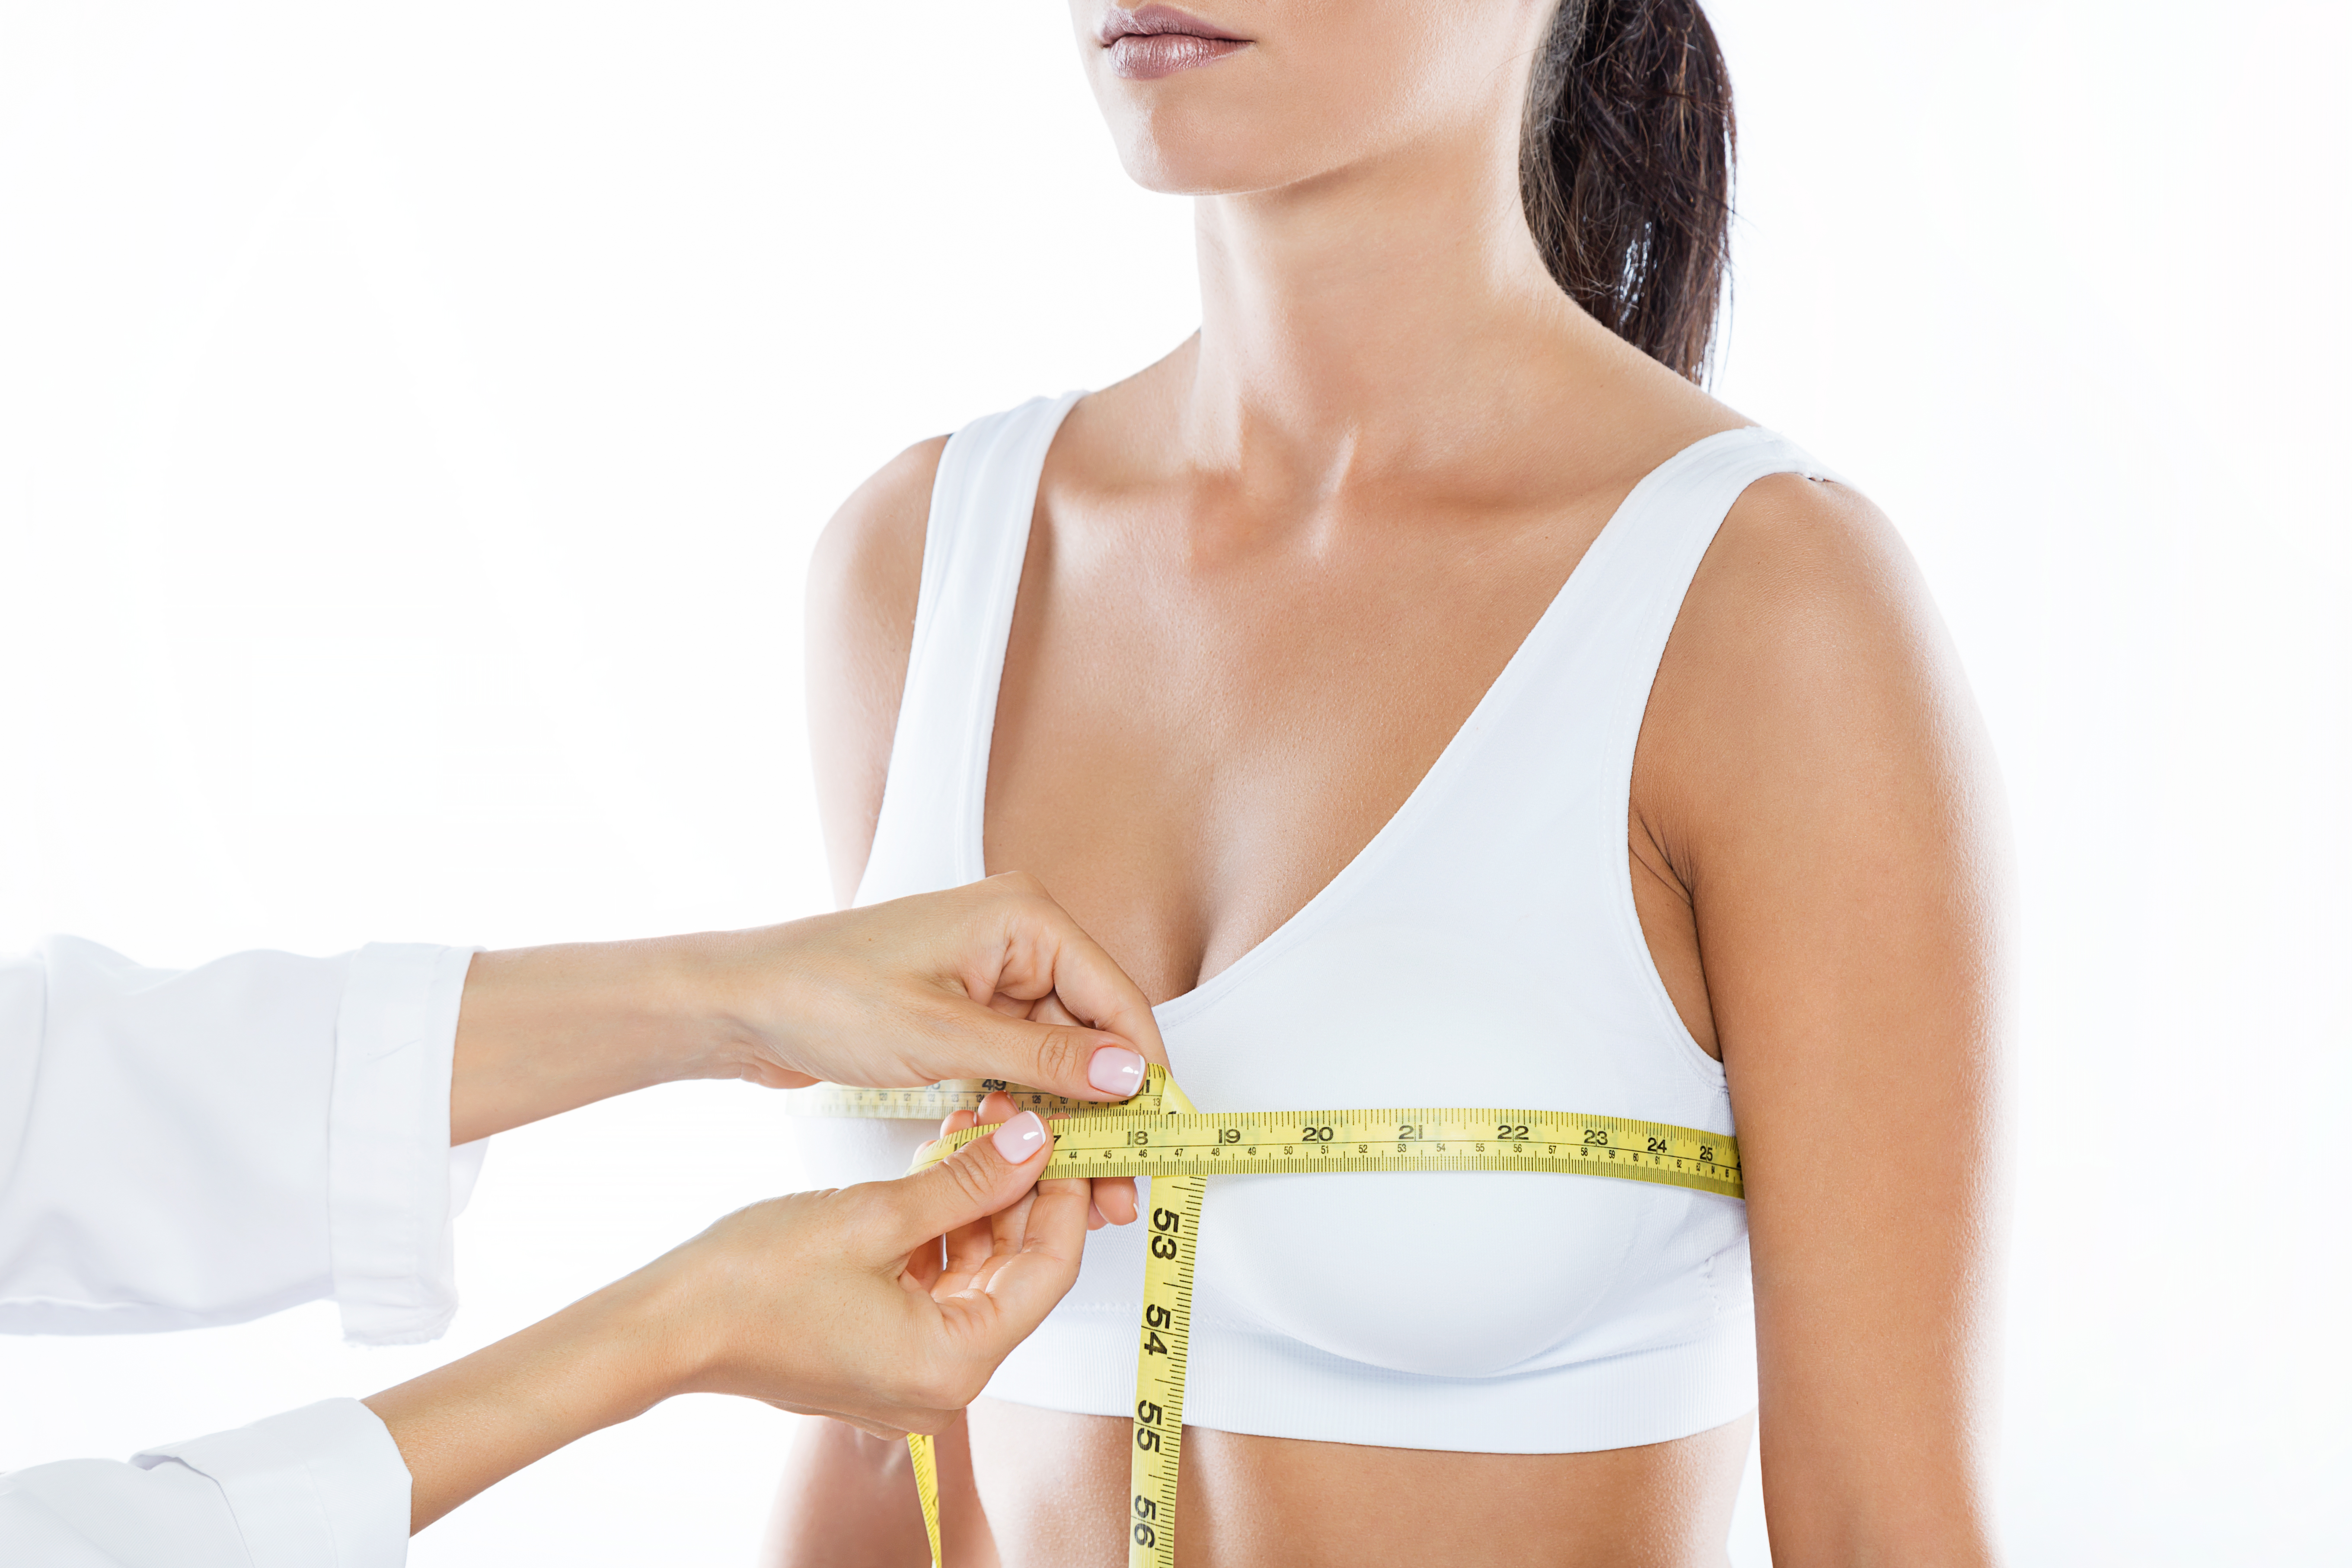 What are the reasons behind increasing the breast size of women